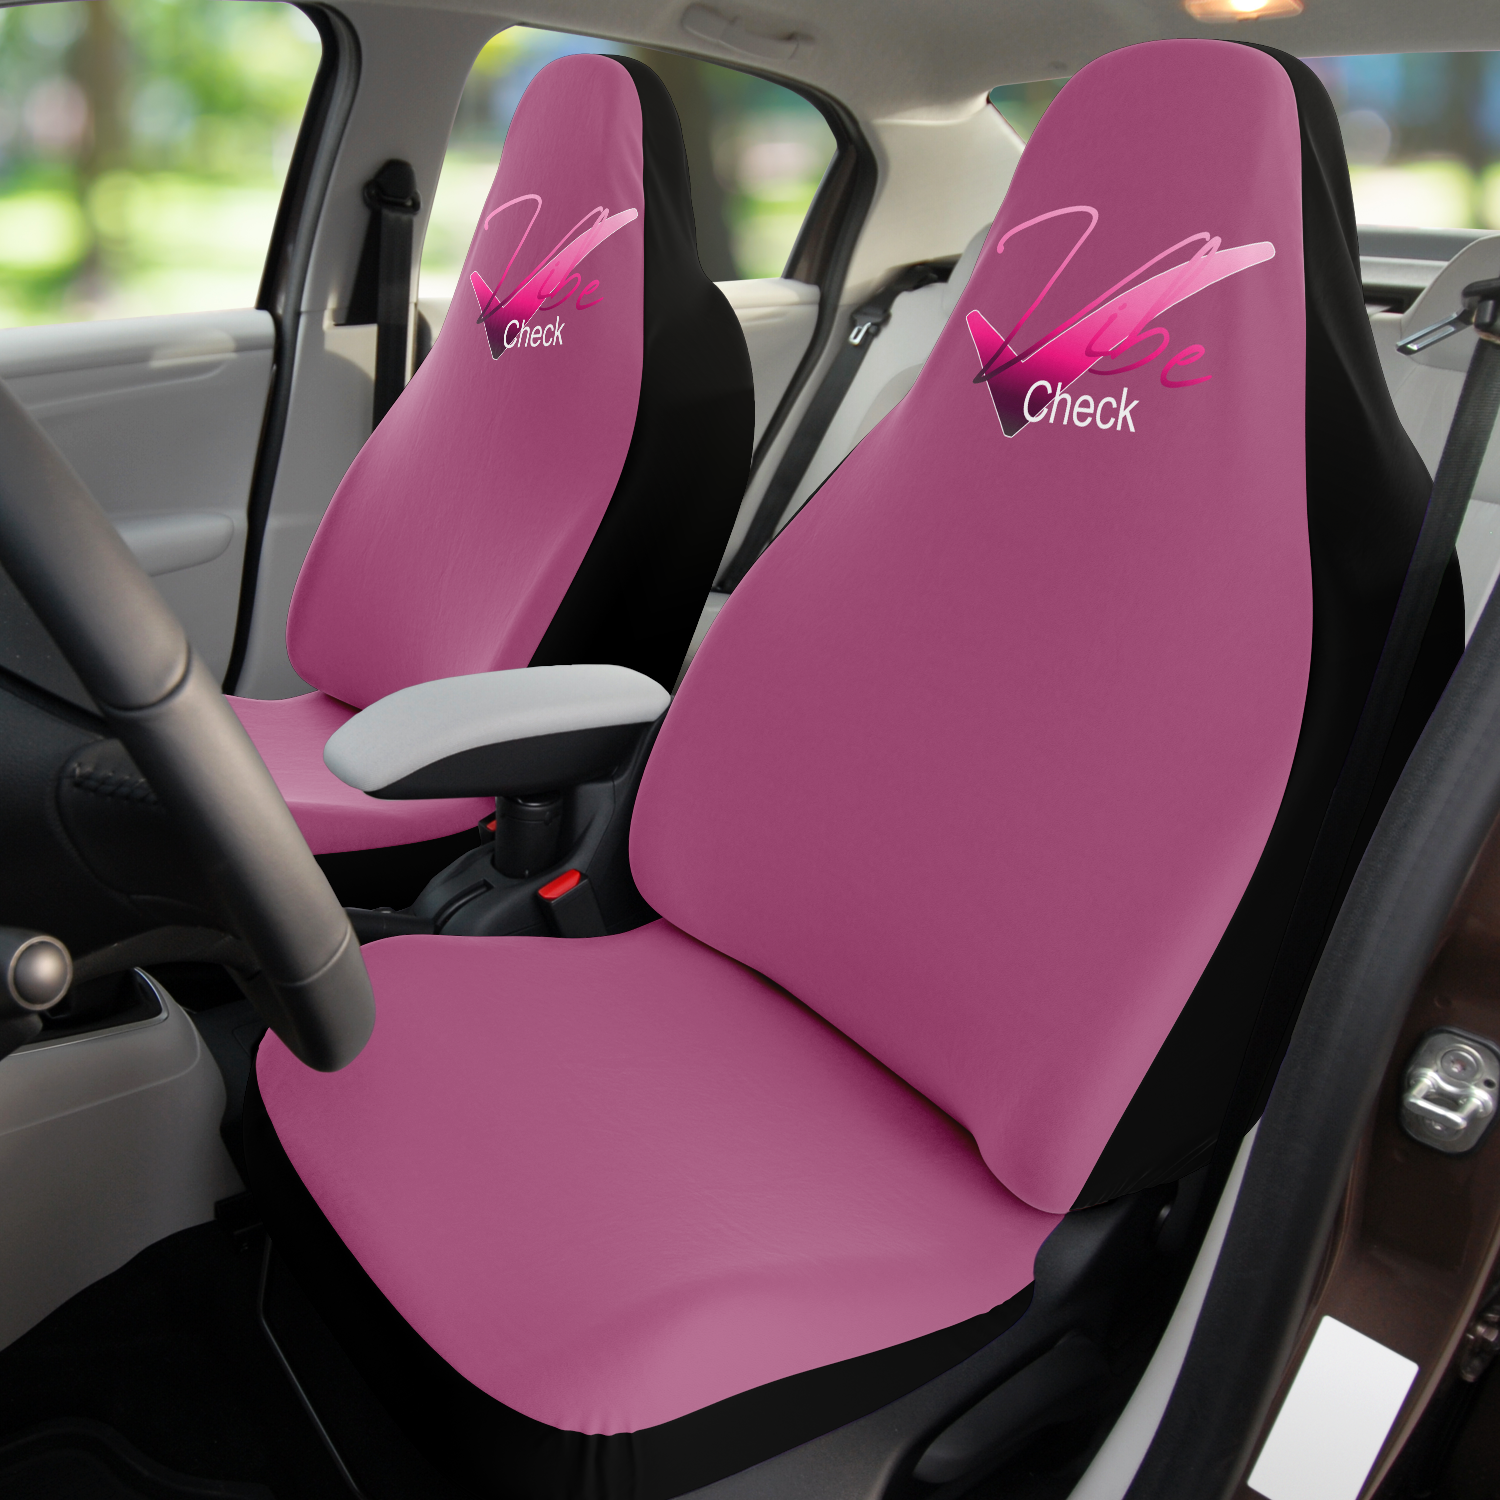 VIBE CHECK - Seat Covers